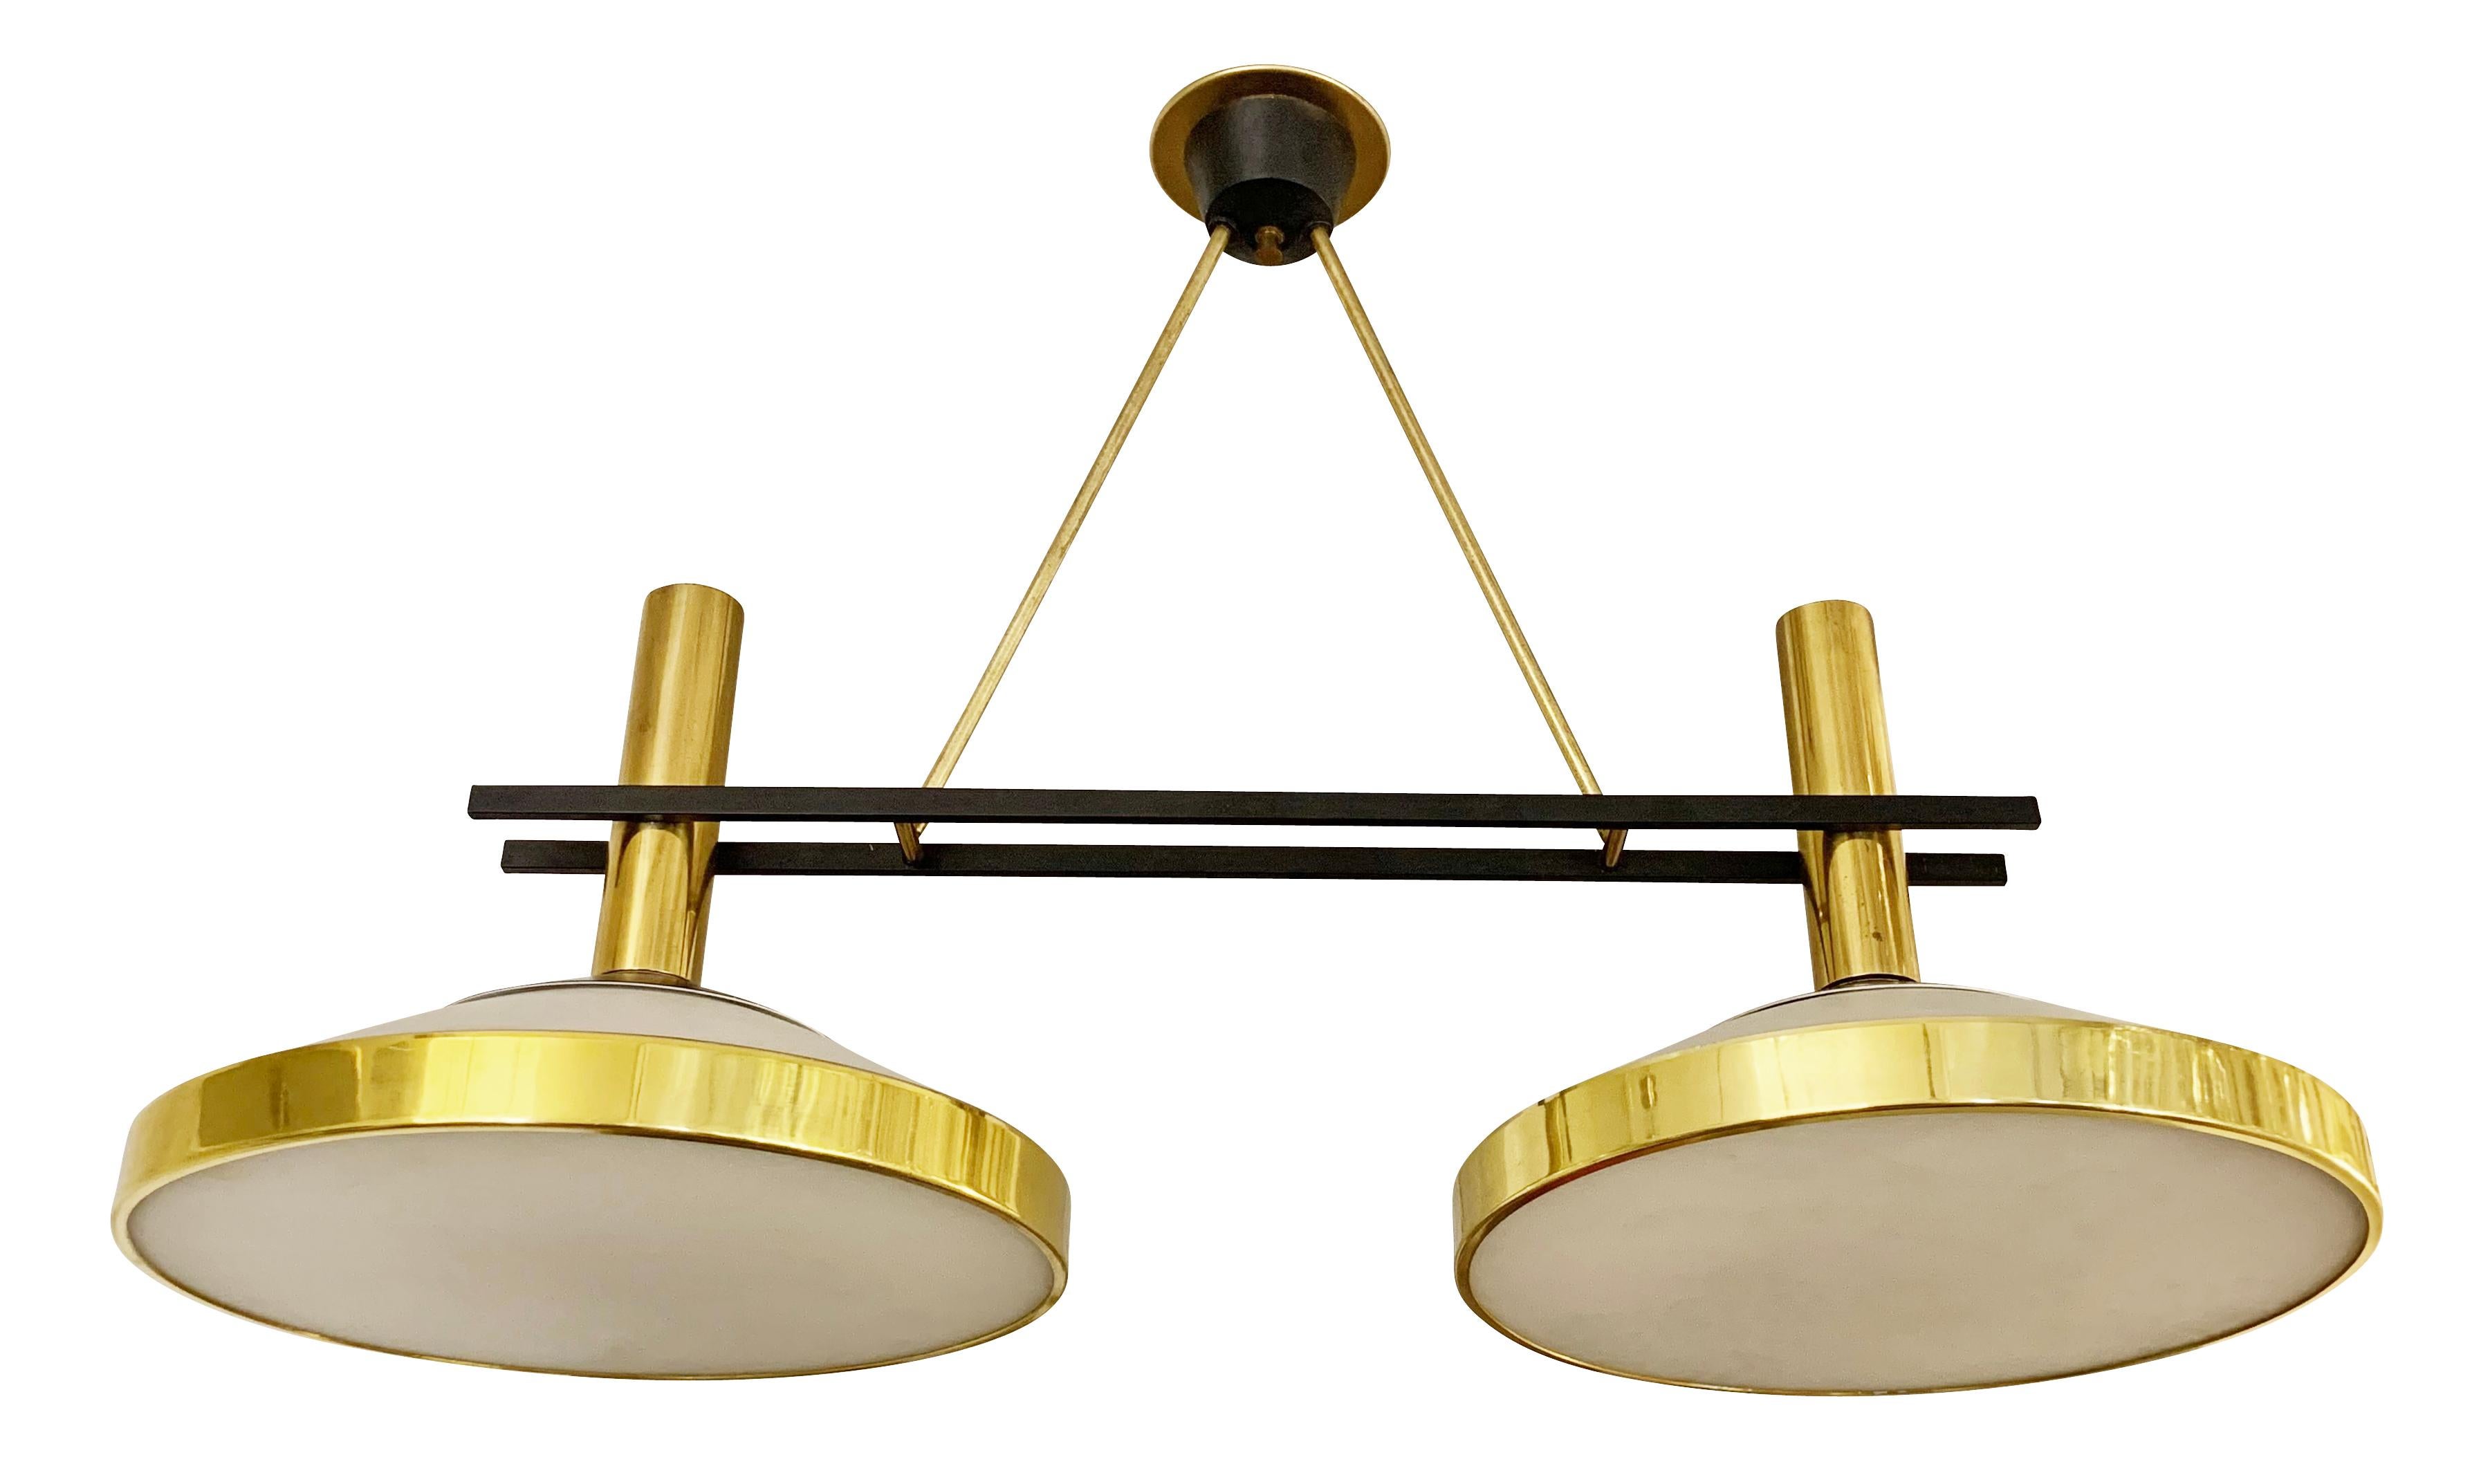 Italian midcentury ceiling light by Stilnovo. Features two frosted glass shades with brass frames and black detailing. Ideal over a kitchen island or dining table.

Condition: Excellent vintage condition, minor wear consistent with age and